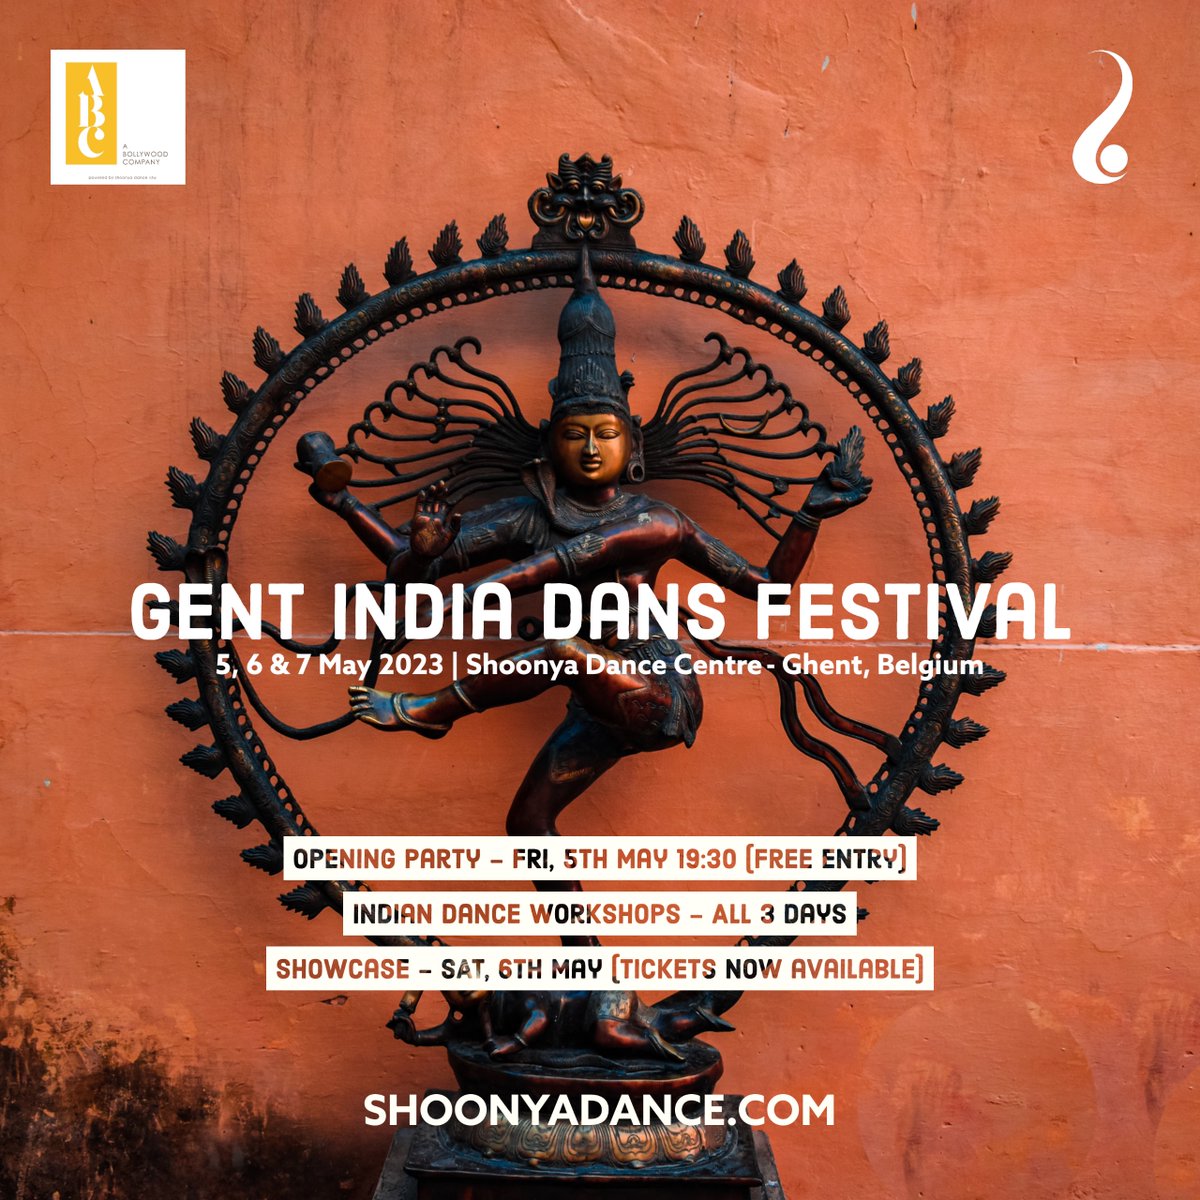 Excited for #GentIndiaDansFestival2023 in #Belgium! Get ready to witness the best of Indian dance featuring performances by amazing guest teachers from around the world. Don't miss the free opening party - it's going to be epic! #IndianDance #DansFestival #Ghentcity #indischedans